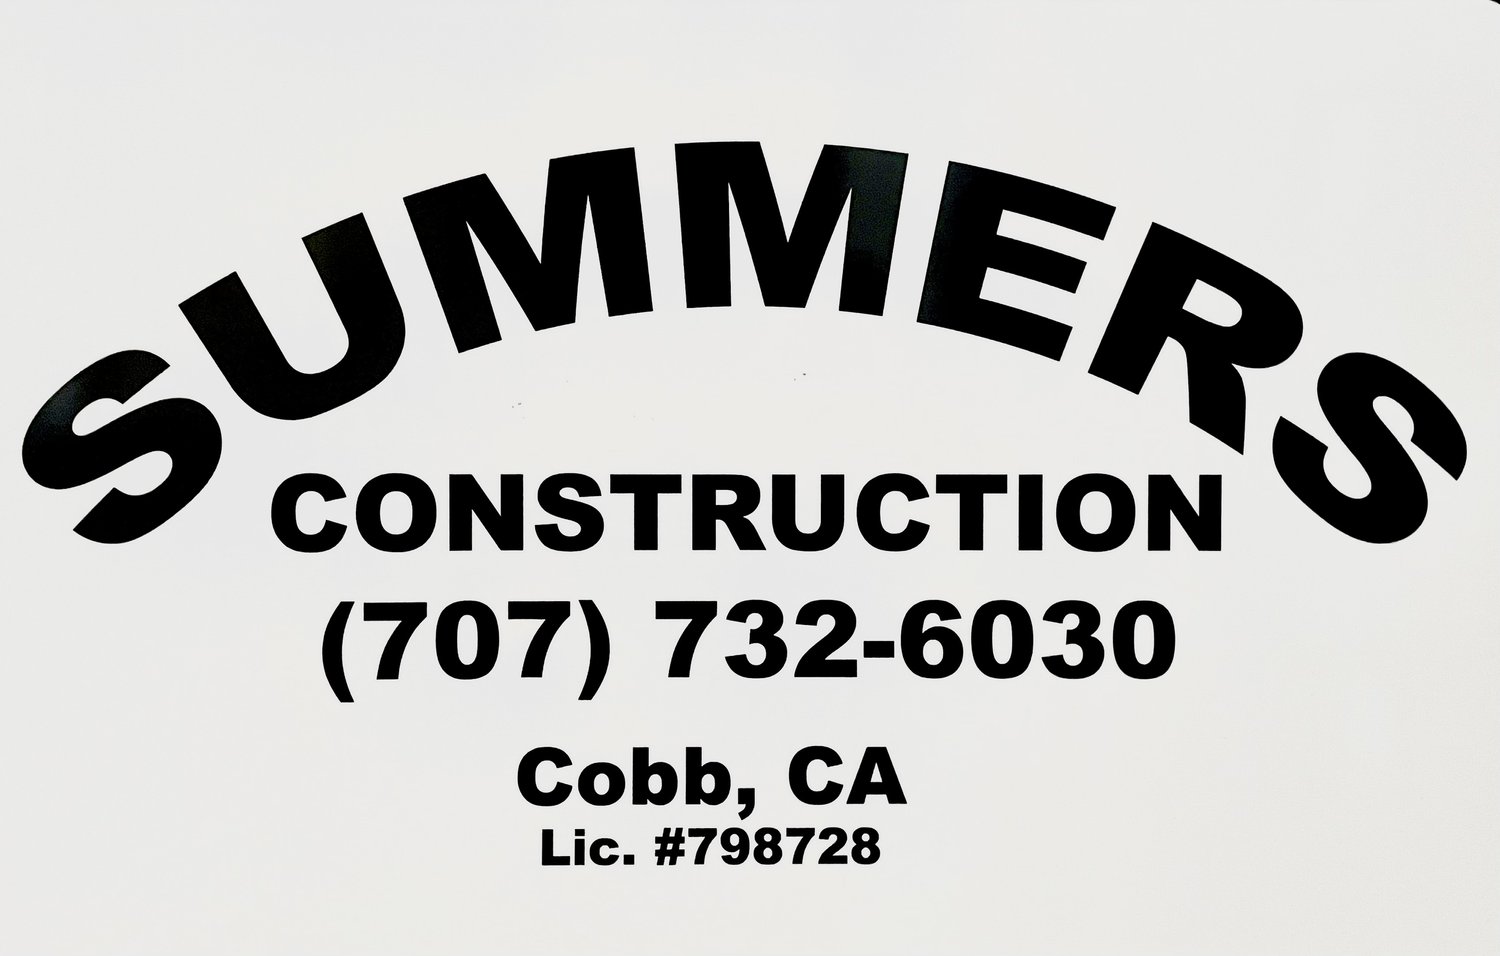 Summers Construction